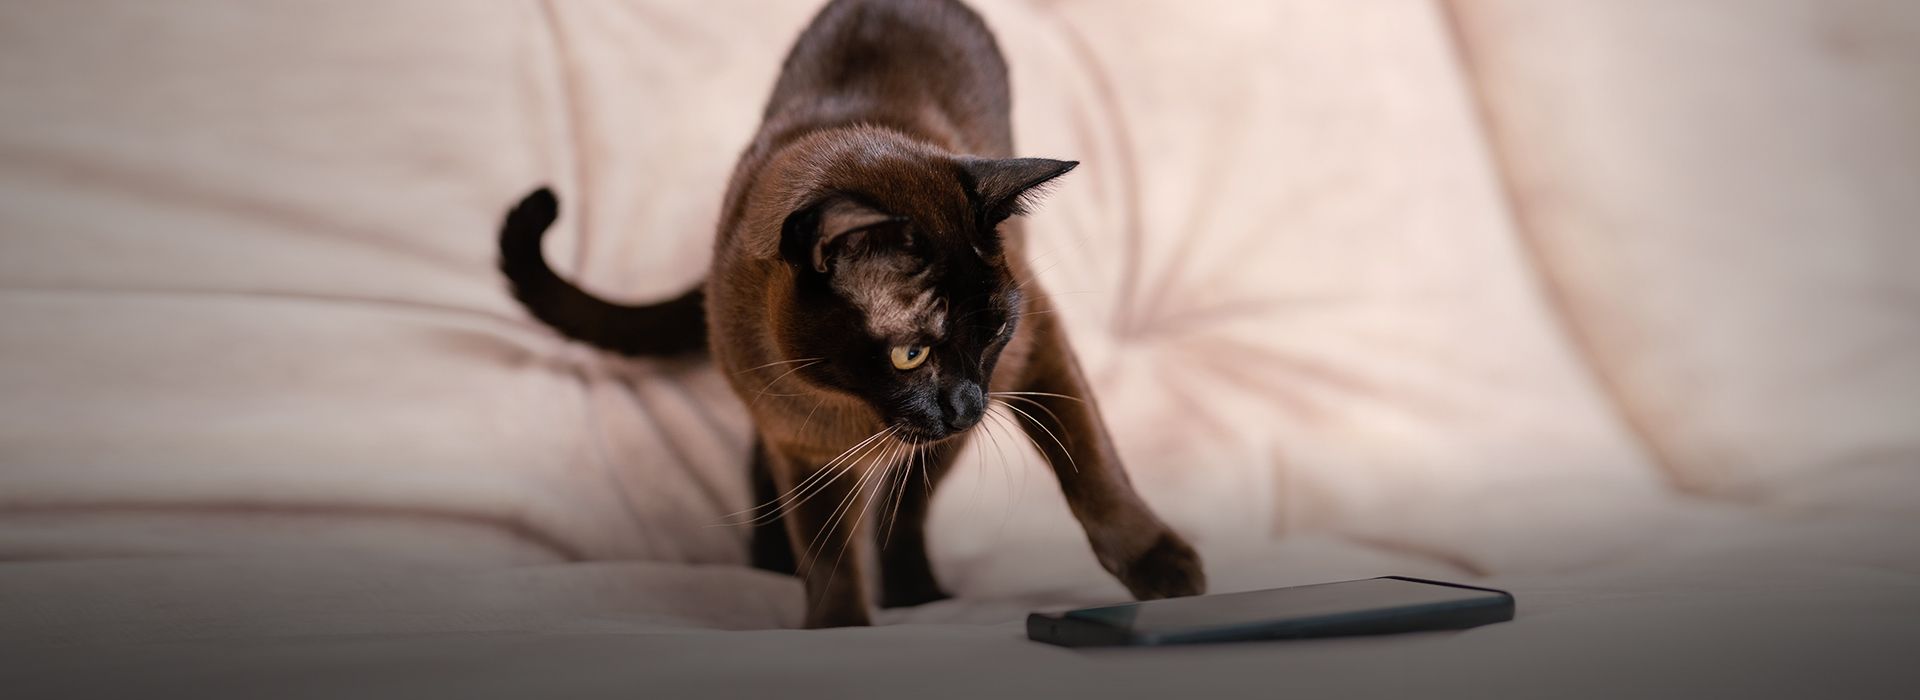 Black cat stretching its paw to smartphone on the couch